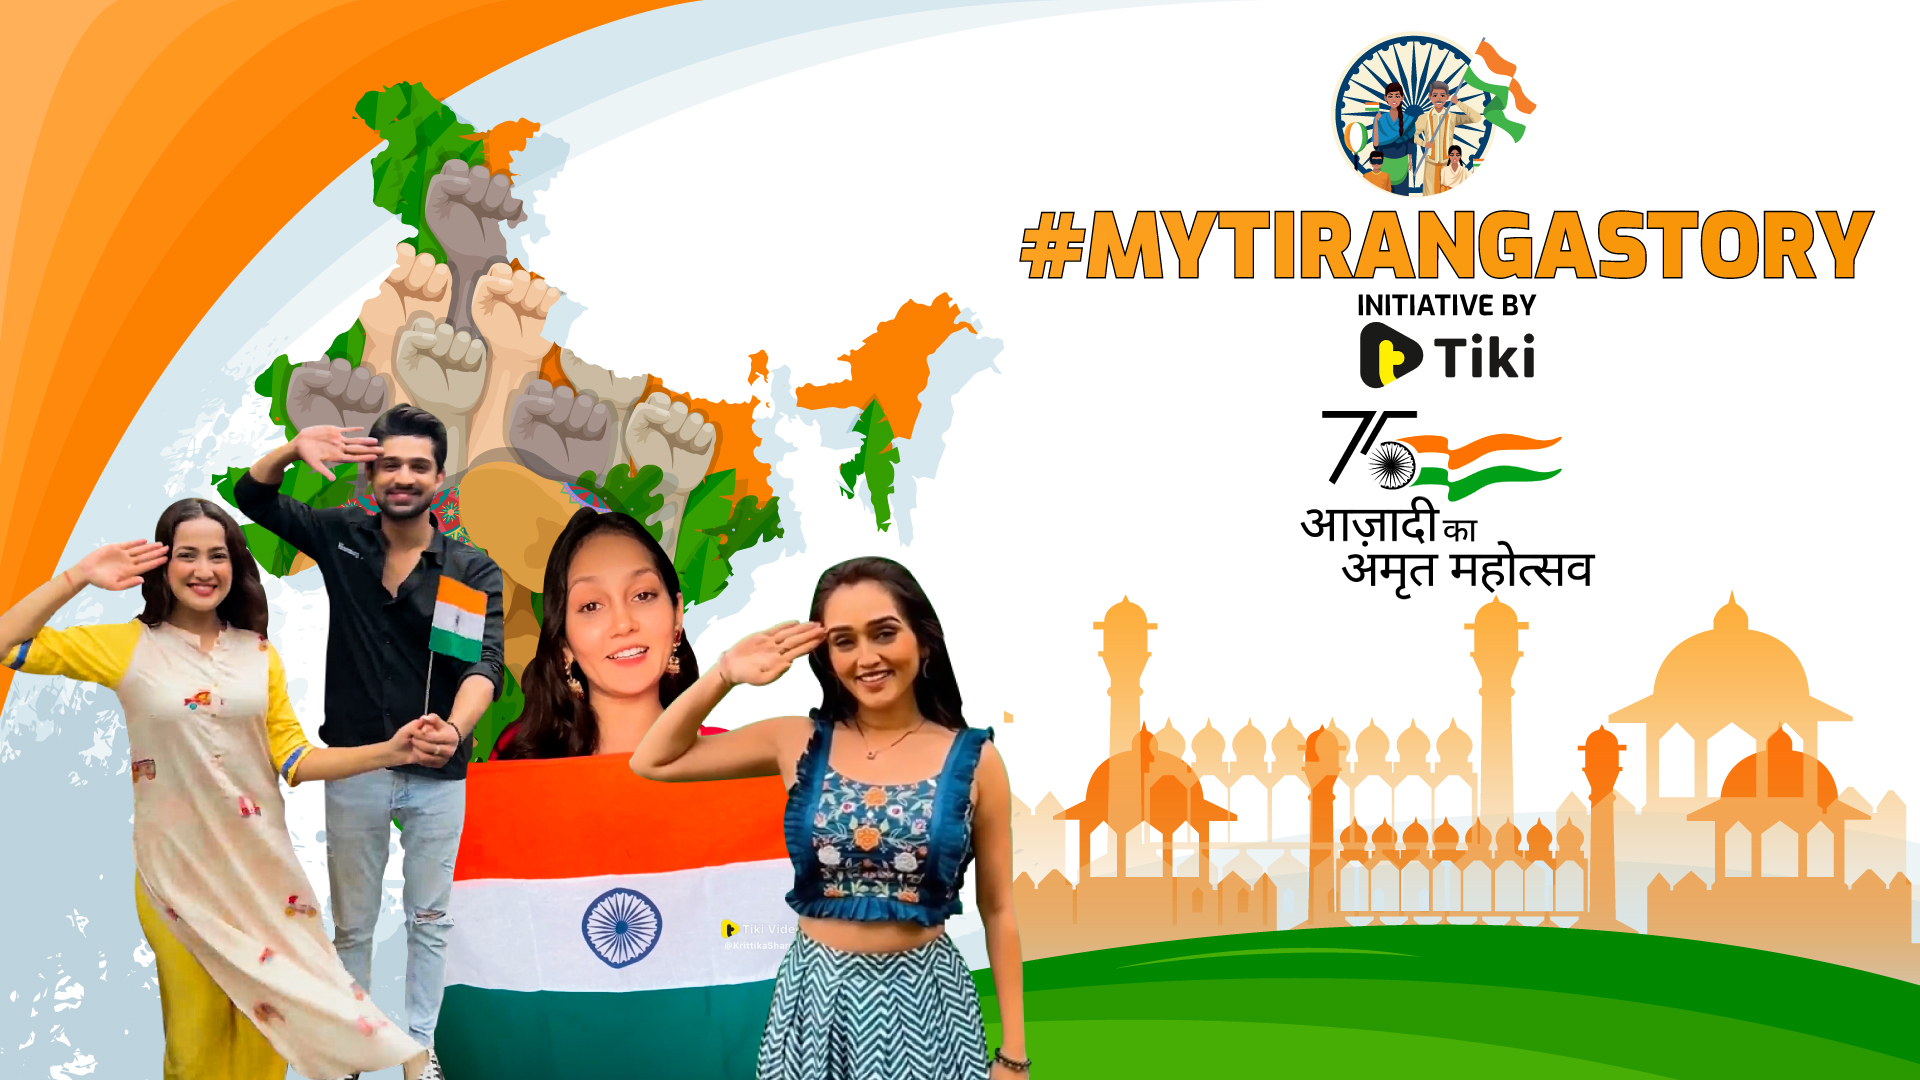 Celebrating 75 years of Independence, Short Video Community - Tiki launches #MyTirangaStory in line with PM’s ‘Har Ghar Tiranga Campaign’